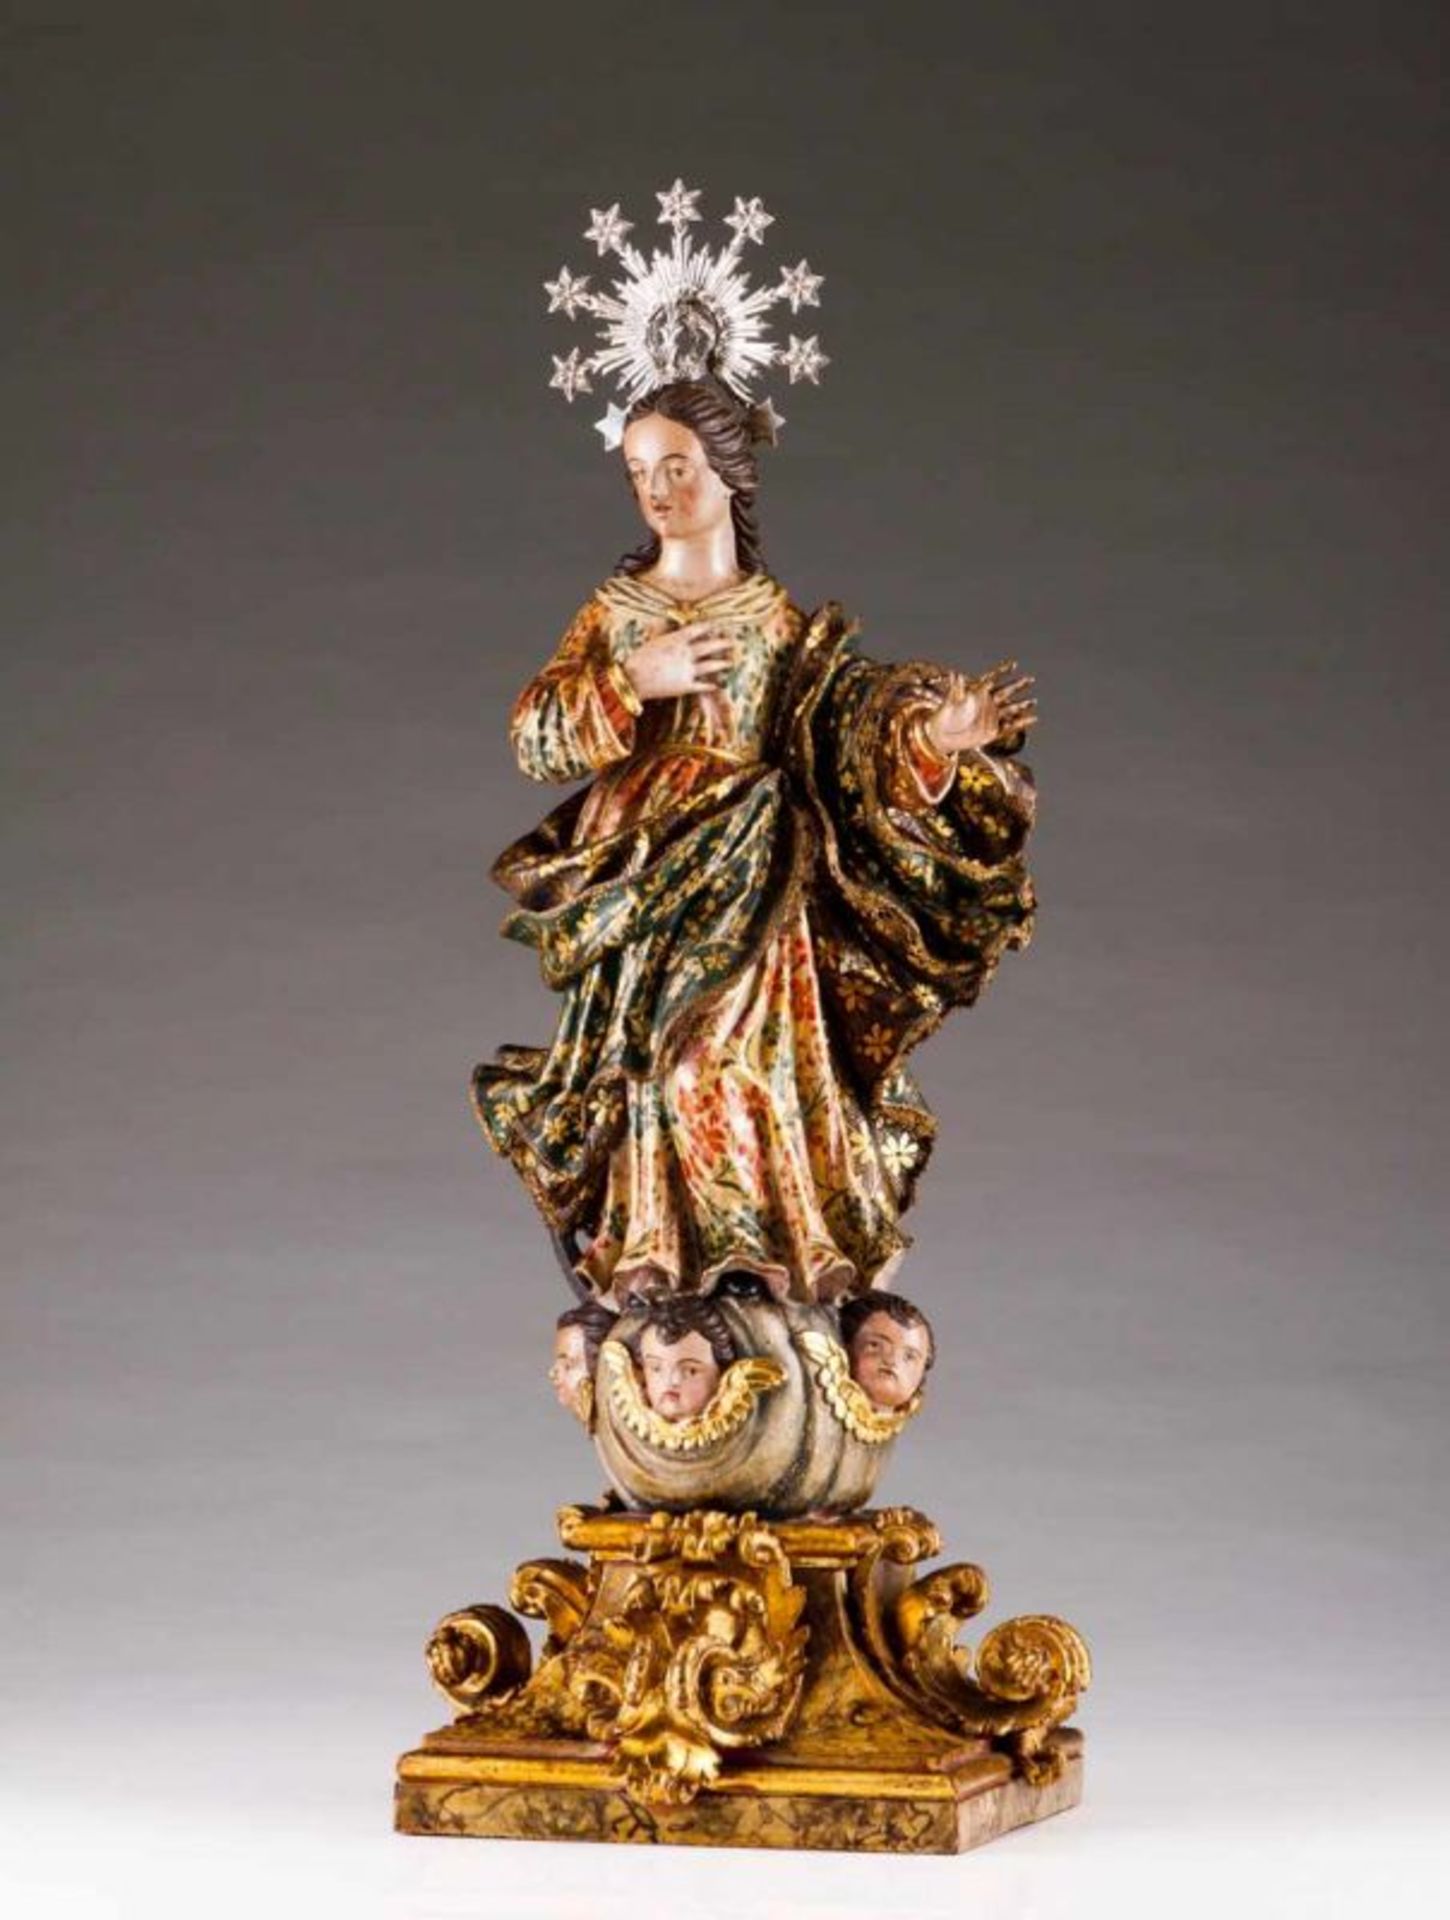 Our Lady Carved, painted and gilt wood sculpture Richely decorated clothes with floral pattern and